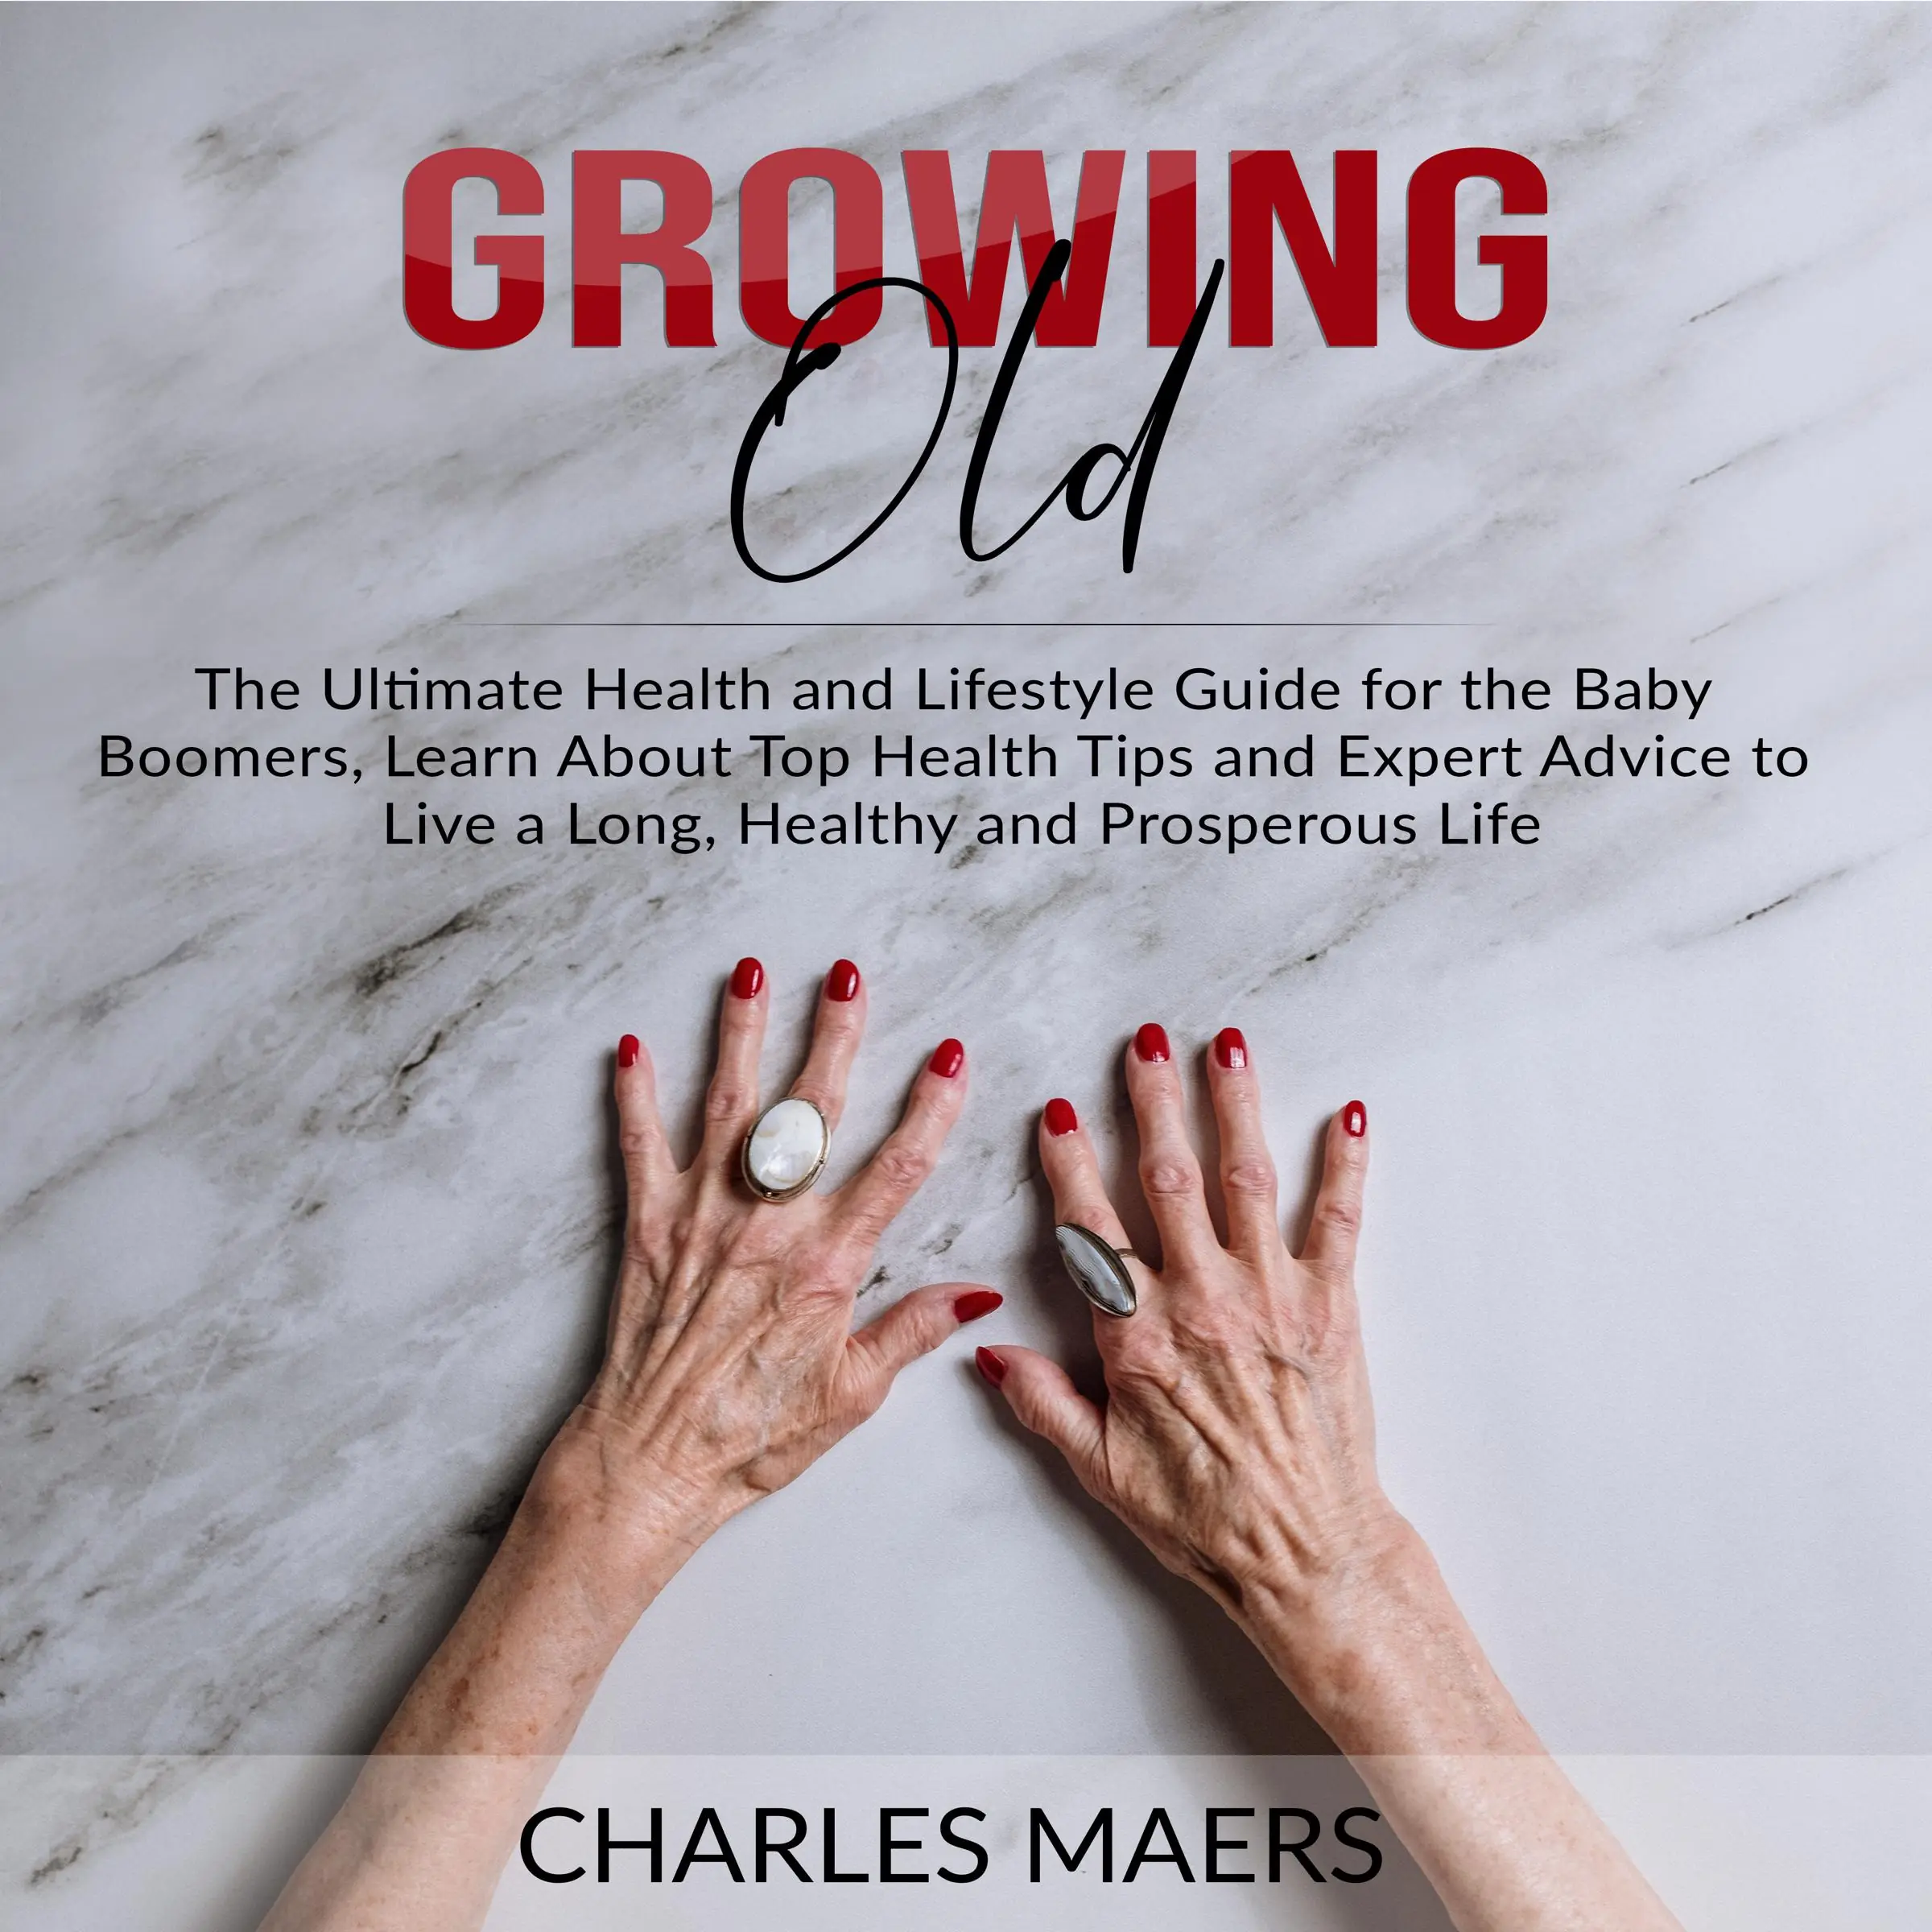 Growing Old: The Ultimate Health and Lifestyle Guide for the Baby Boomers, Learn About Top Health Tips and Expert Advice to Live a Long, Healthy and Prosperous Life by Charles Maers Audiobook